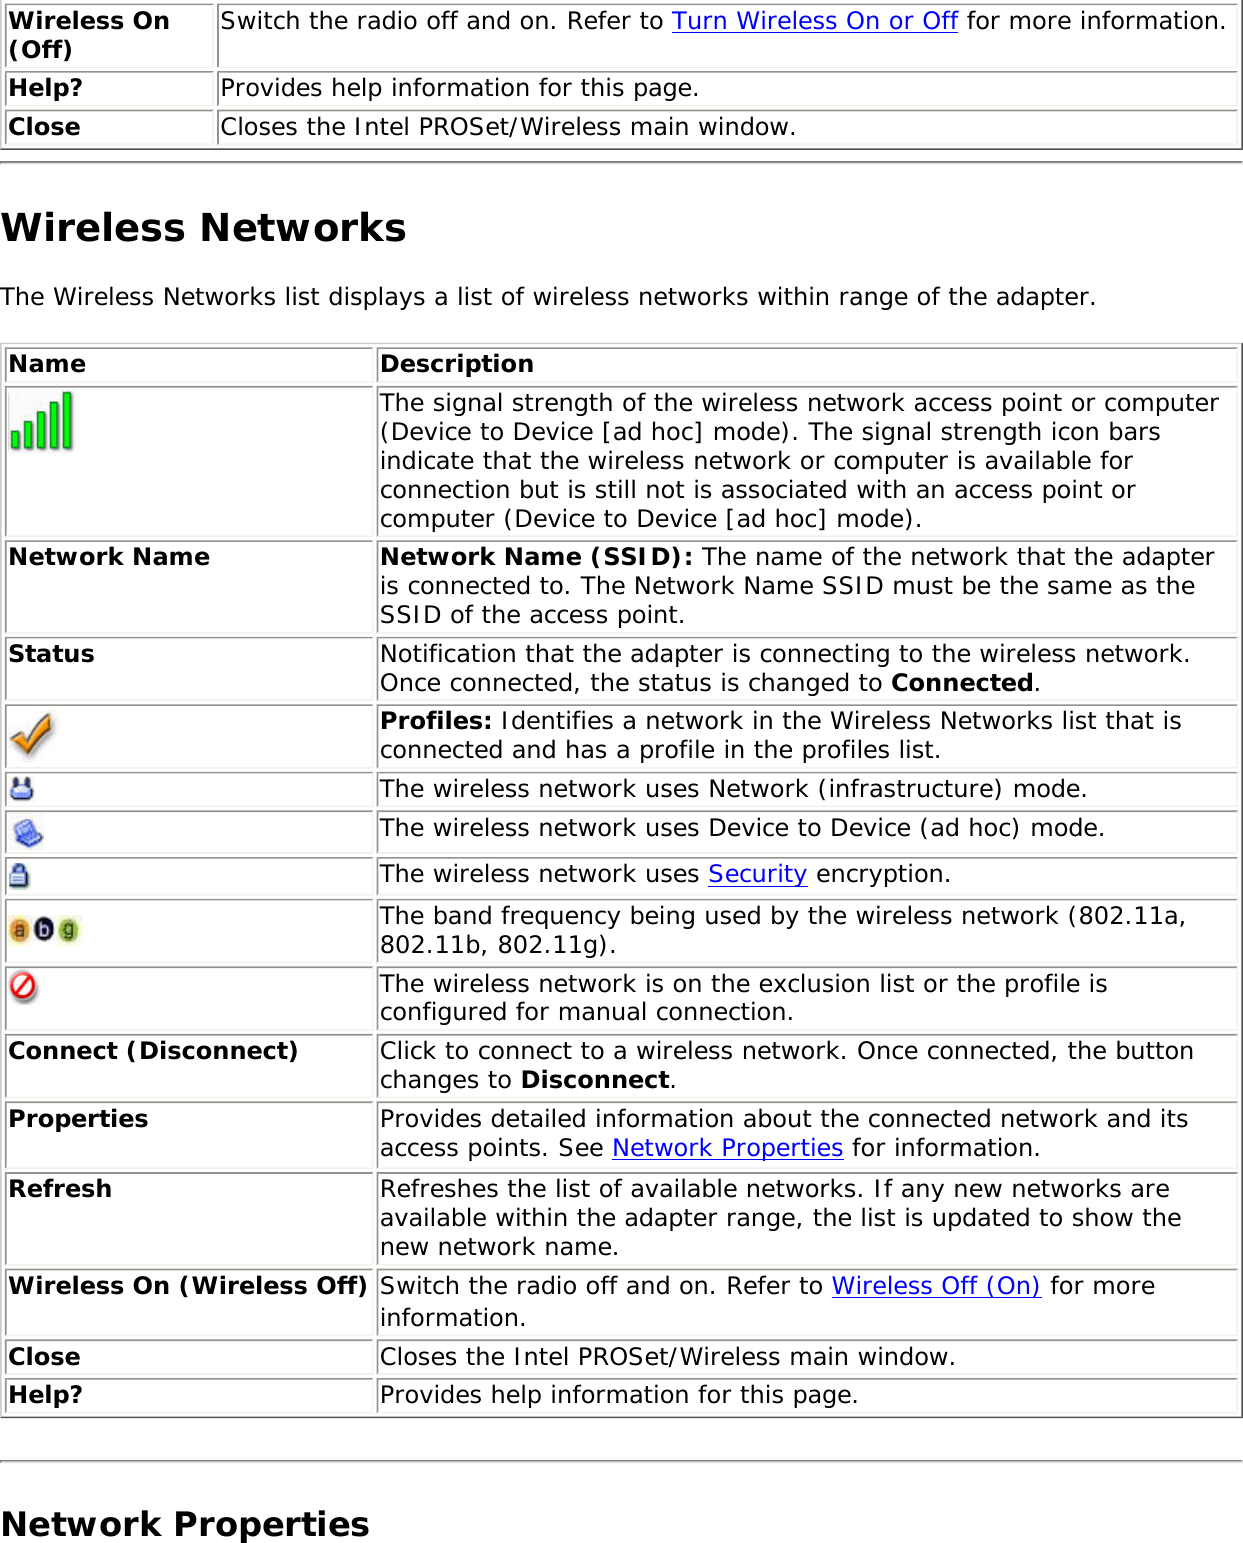 Wireless On (Off) Switch the radio off and on. Refer to Turn Wireless On or Off for more information.Help? Provides help information for this page. Close Closes the Intel PROSet/Wireless main window.Wireless NetworksThe Wireless Networks list displays a list of wireless networks within range of the adapter. Name Description The signal strength of the wireless network access point or computer (Device to Device [ad hoc] mode). The signal strength icon bars indicate that the wireless network or computer is available for connection but is still not is associated with an access point or computer (Device to Device [ad hoc] mode).Network Name Network Name (SSID): The name of the network that the adapter is connected to. The Network Name SSID must be the same as the SSID of the access point.Status Notification that the adapter is connecting to the wireless network. Once connected, the status is changed to Connected. Profiles: Identifies a network in the Wireless Networks list that is connected and has a profile in the profiles list. The wireless network uses Network (infrastructure) mode. The wireless network uses Device to Device (ad hoc) mode.The wireless network uses Security encryption.The band frequency being used by the wireless network (802.11a, 802.11b, 802.11g).The wireless network is on the exclusion list or the profile is configured for manual connection.Connect (Disconnect)  Click to connect to a wireless network. Once connected, the button changes to Disconnect.Properties Provides detailed information about the connected network and its access points. See Network Properties for information. Refresh  Refreshes the list of available networks. If any new networks are available within the adapter range, the list is updated to show the new network name.  Wireless On (Wireless Off) Switch the radio off and on. Refer to Wireless Off (On) for more information.Close Closes the Intel PROSet/Wireless main window.Help? Provides help information for this page. Network Properties